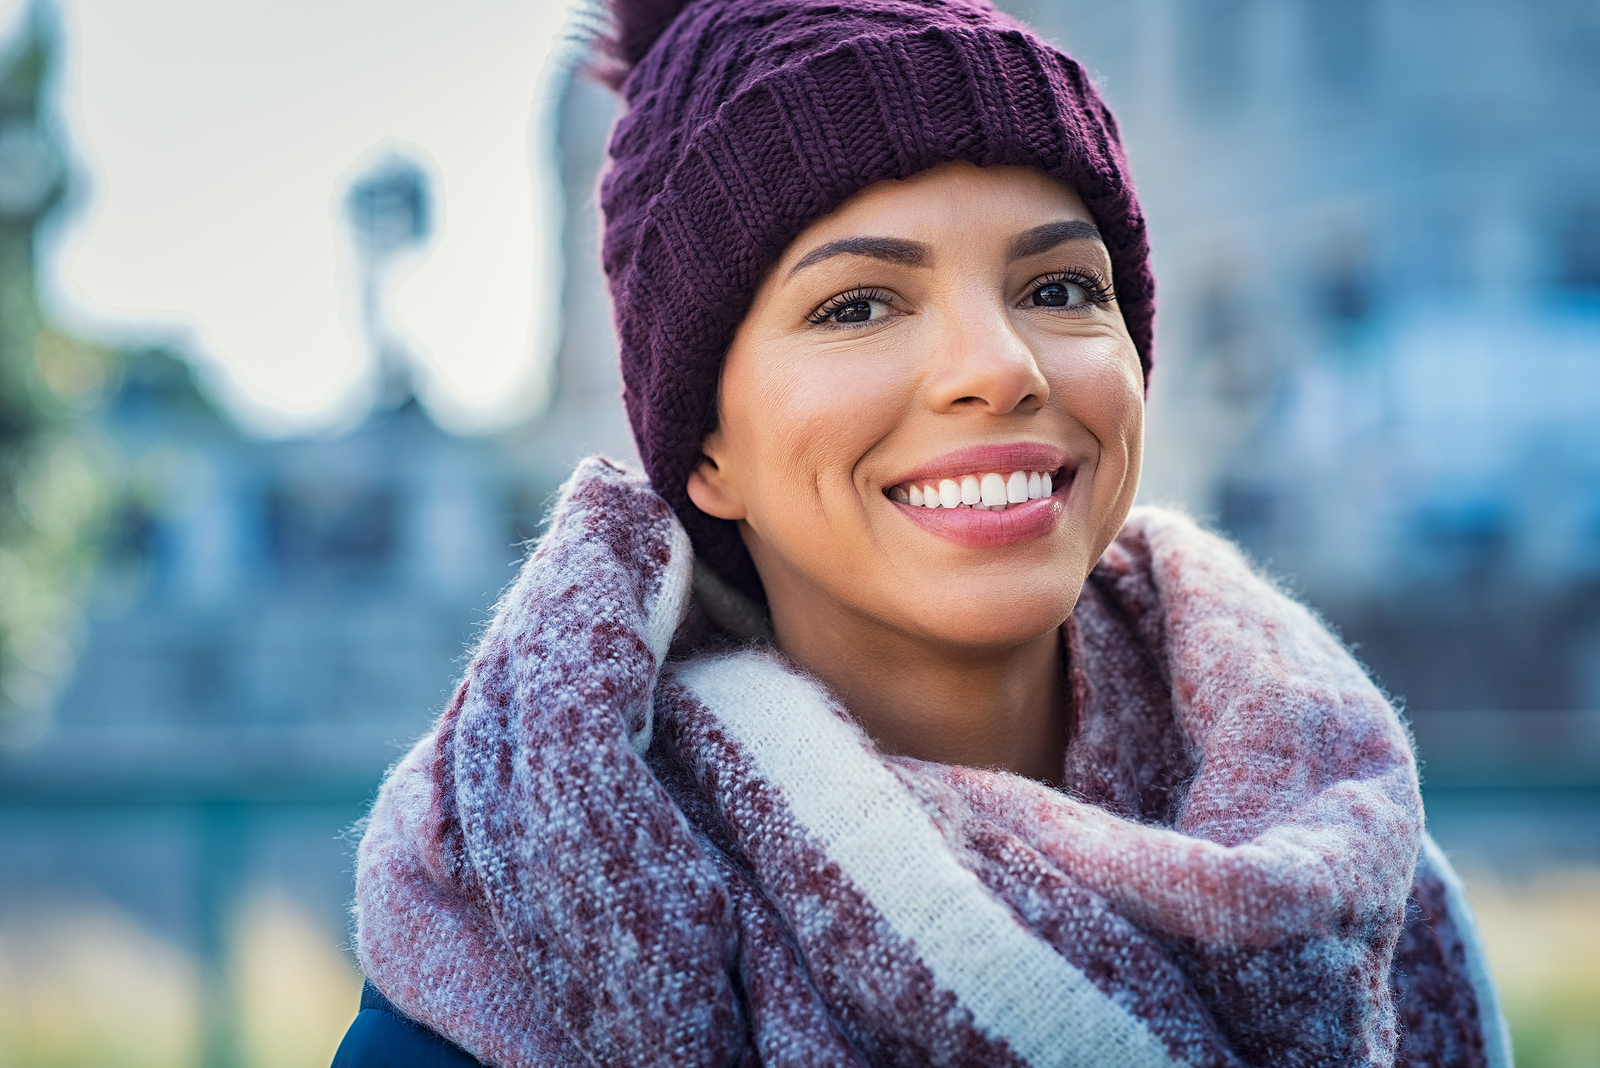 Closeup face of a young happy african woman enjoying winter wearing scarf and cap. Smiling brazilian girl looking at camera in a cold day. Multiethnic woman with knitted bordeaux hat and woolen scarf.